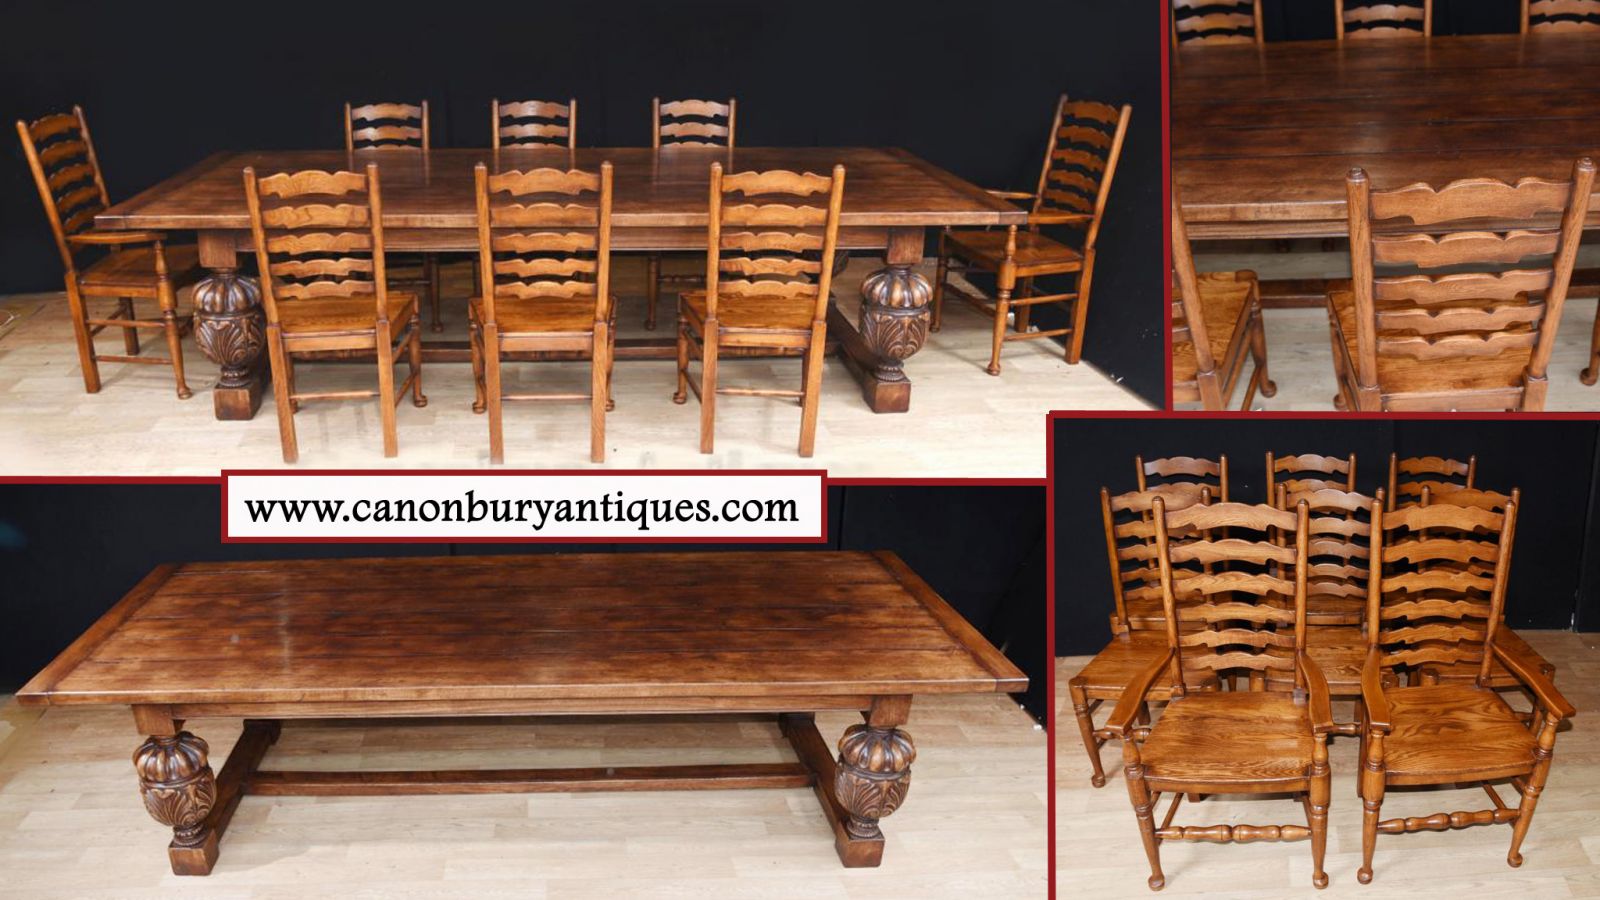 Refectory table with ladderback chairs